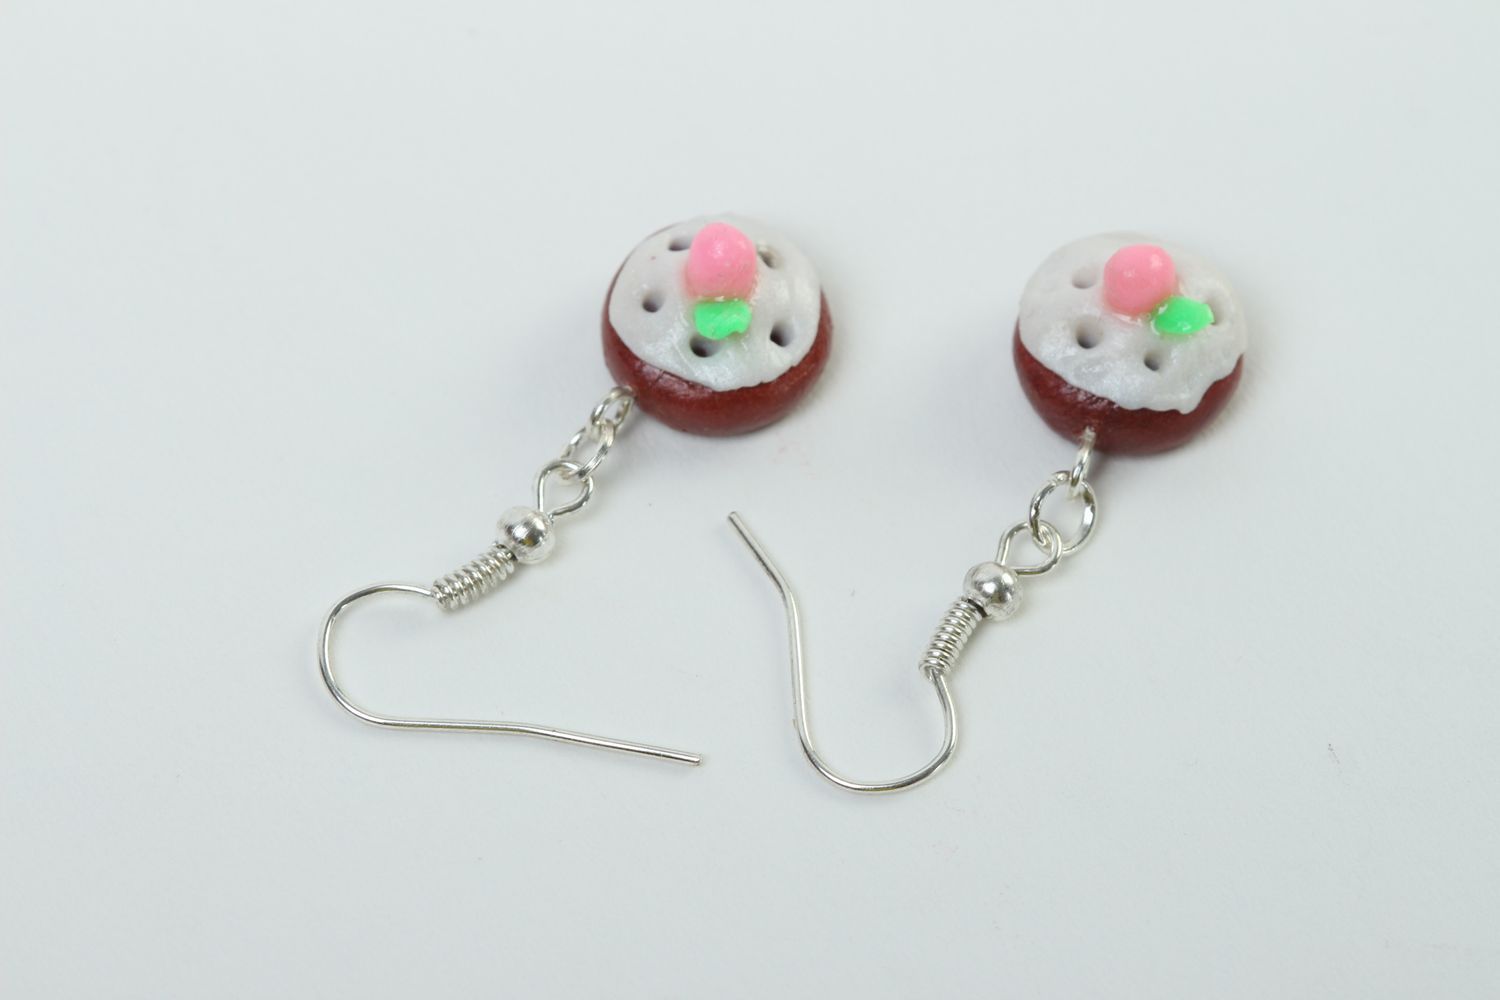 Stylish polymer clay earrings with charms handmade accessories for stylish girl photo 4